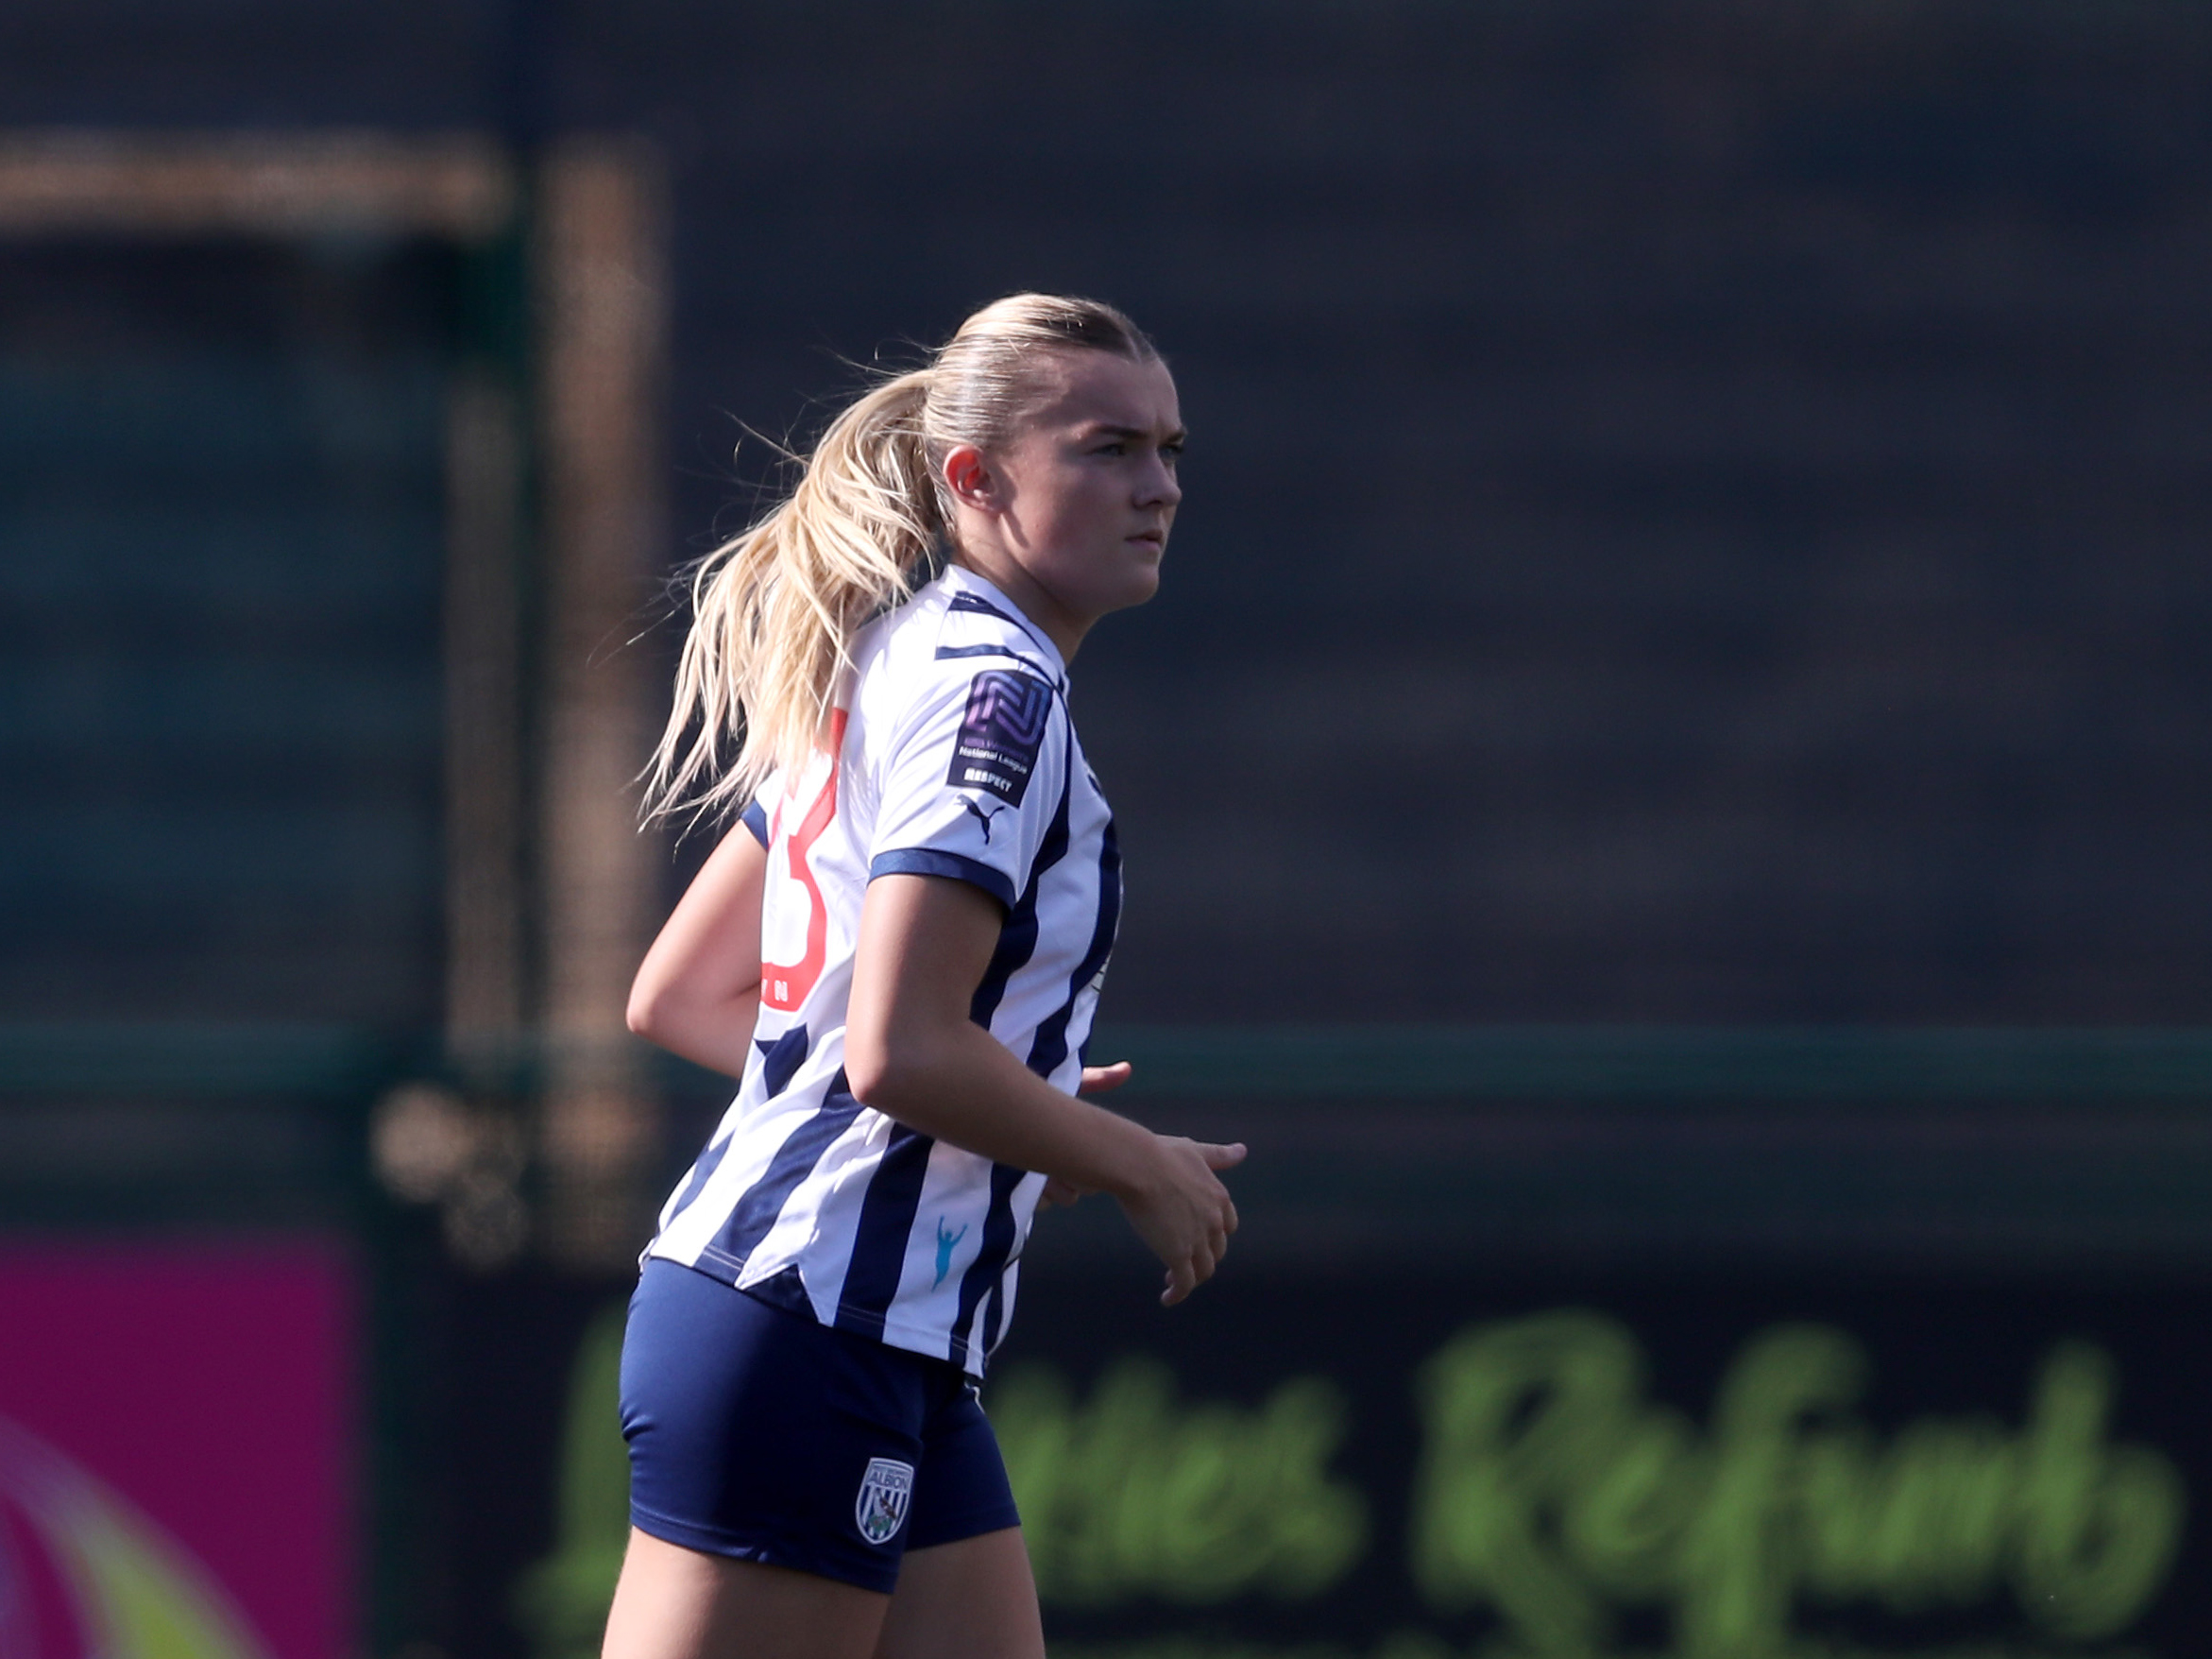 Taylor Reynolds in action for Albion Women wearing the home kit